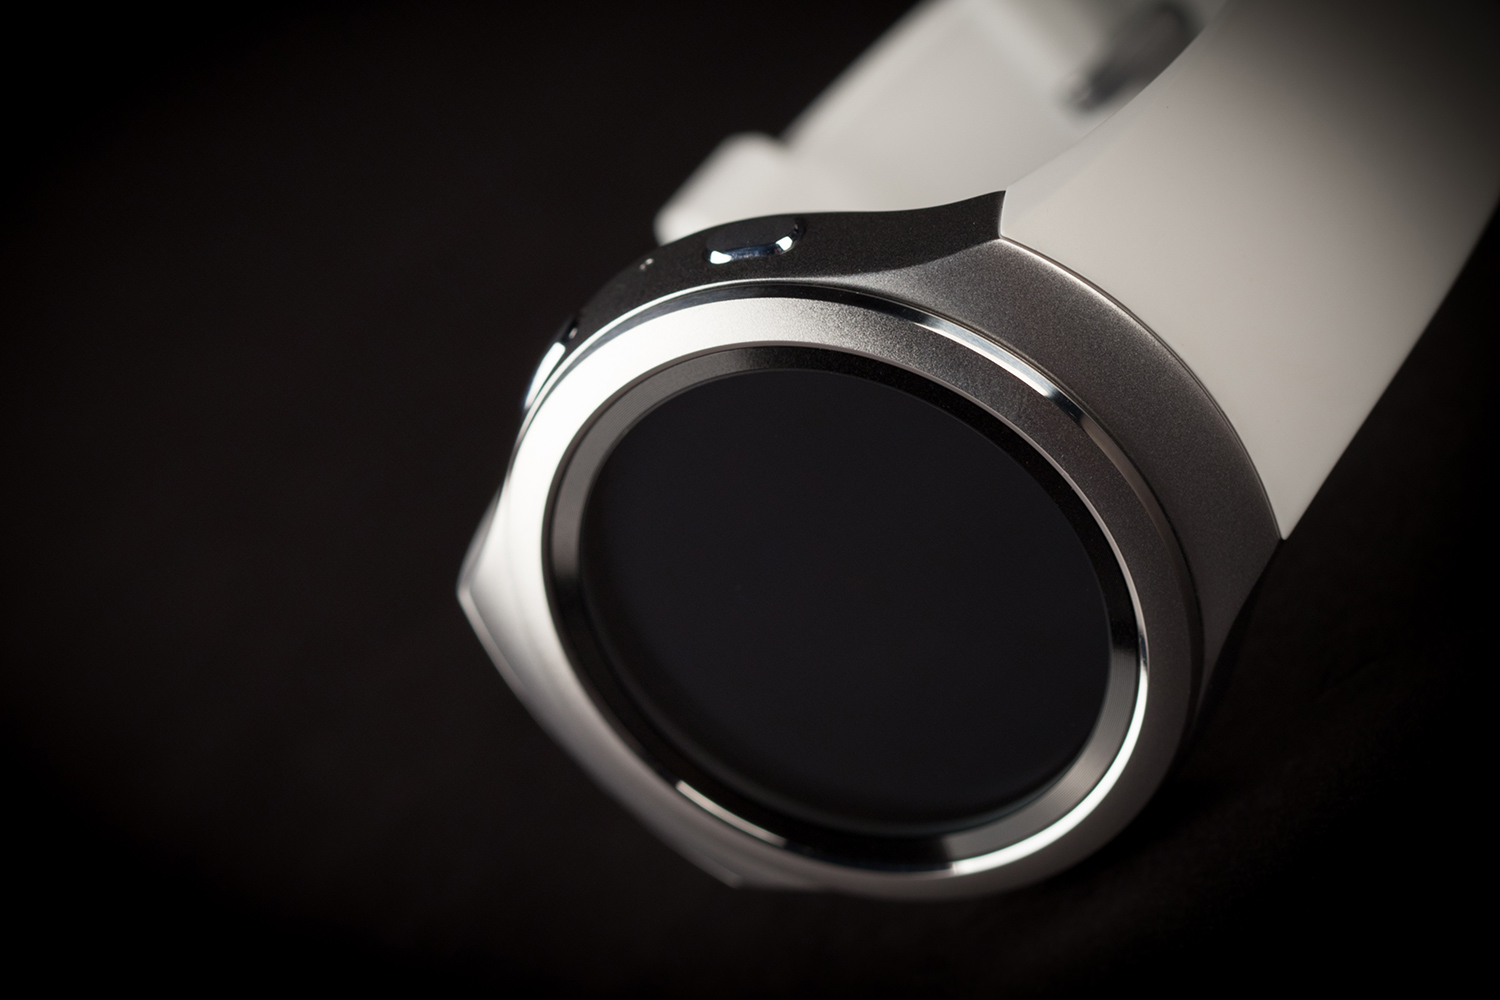 Samsung Gear S2, Full Review, Specs, Price, and More